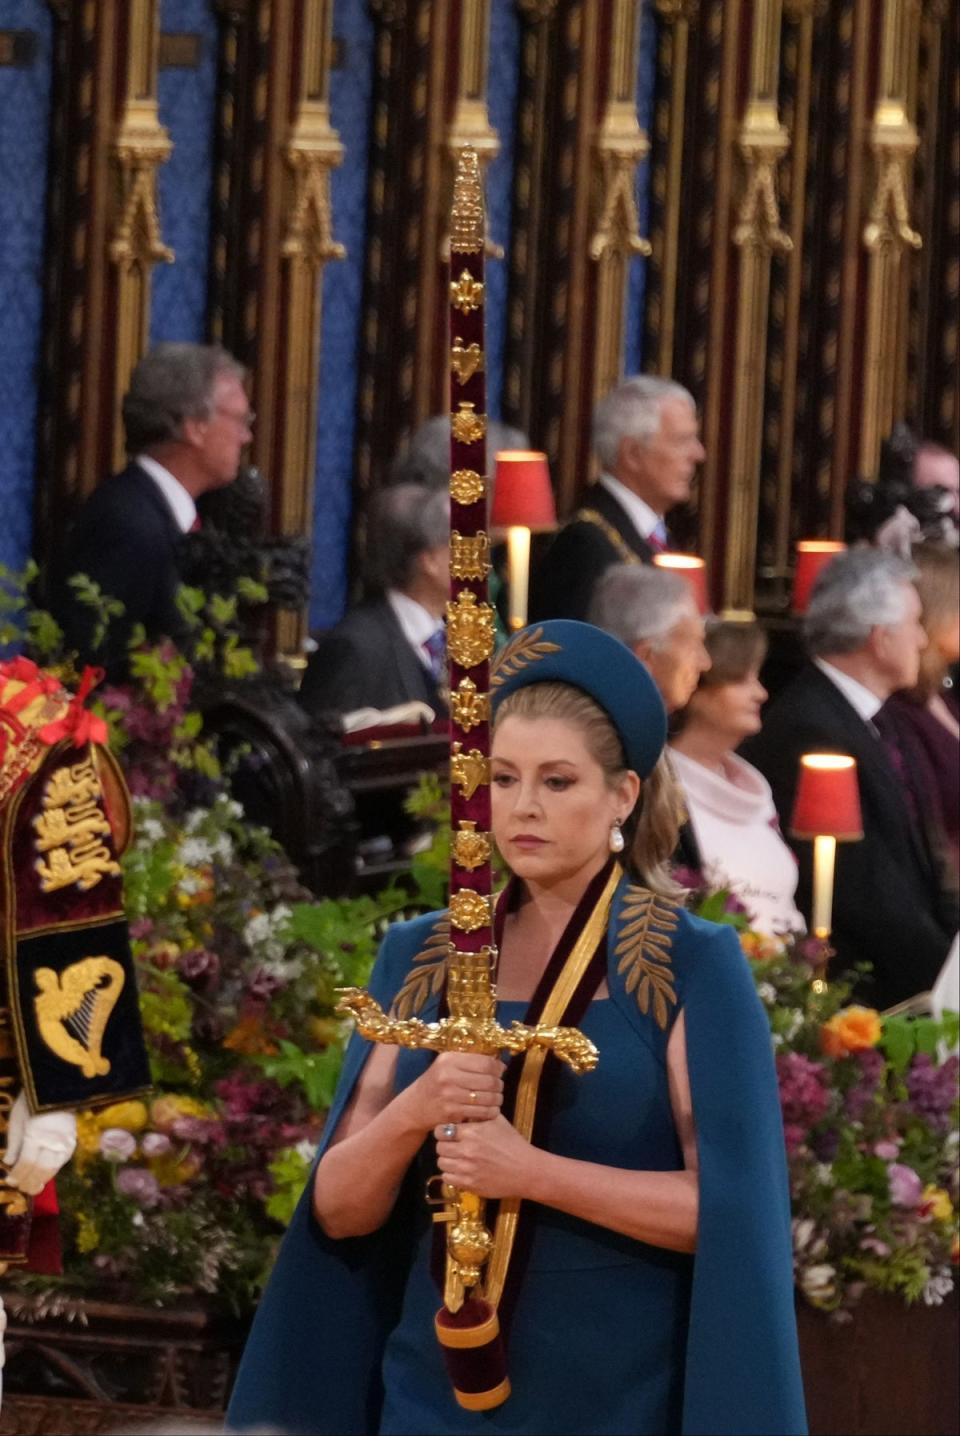 IN FOR A PENNY, IN FOR A POUND: At the Coronation, Lord President ofthe Council Penny Mordaunt held aloft the Sword of State for 51 minutes (Getty Images)